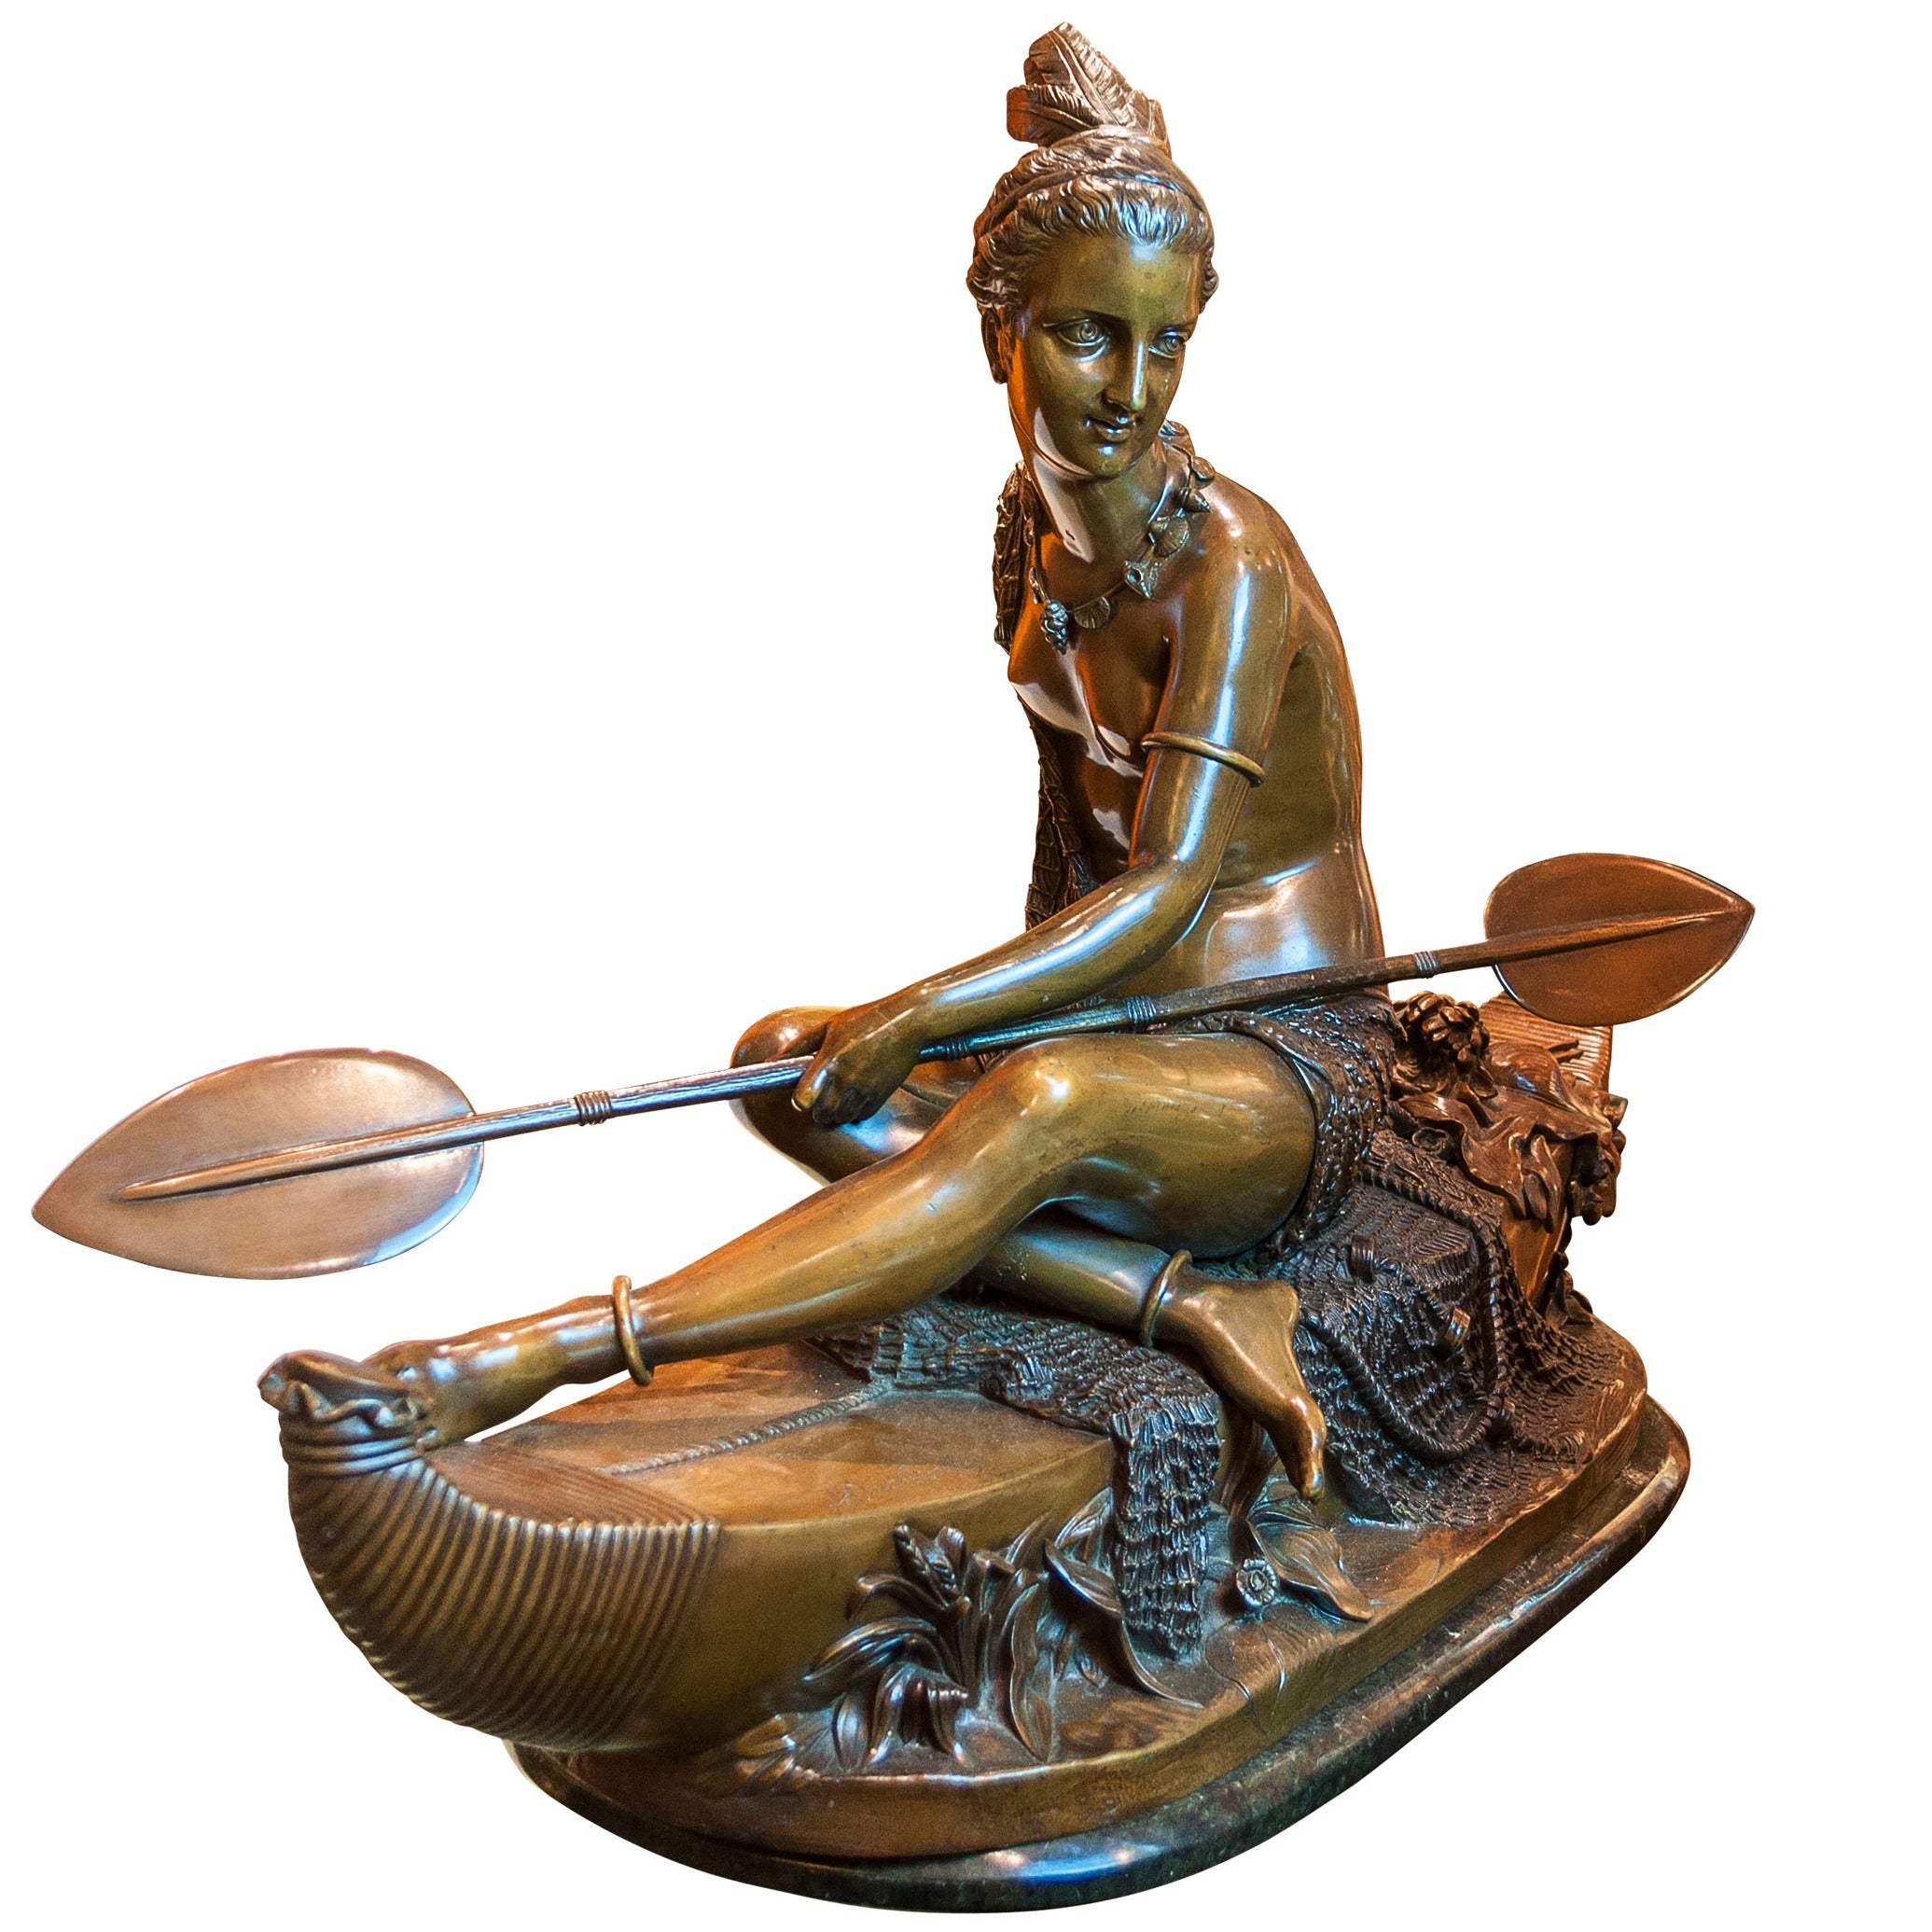 Large Bronze Sculpture of a Native American Indian Maiden in a Canoe